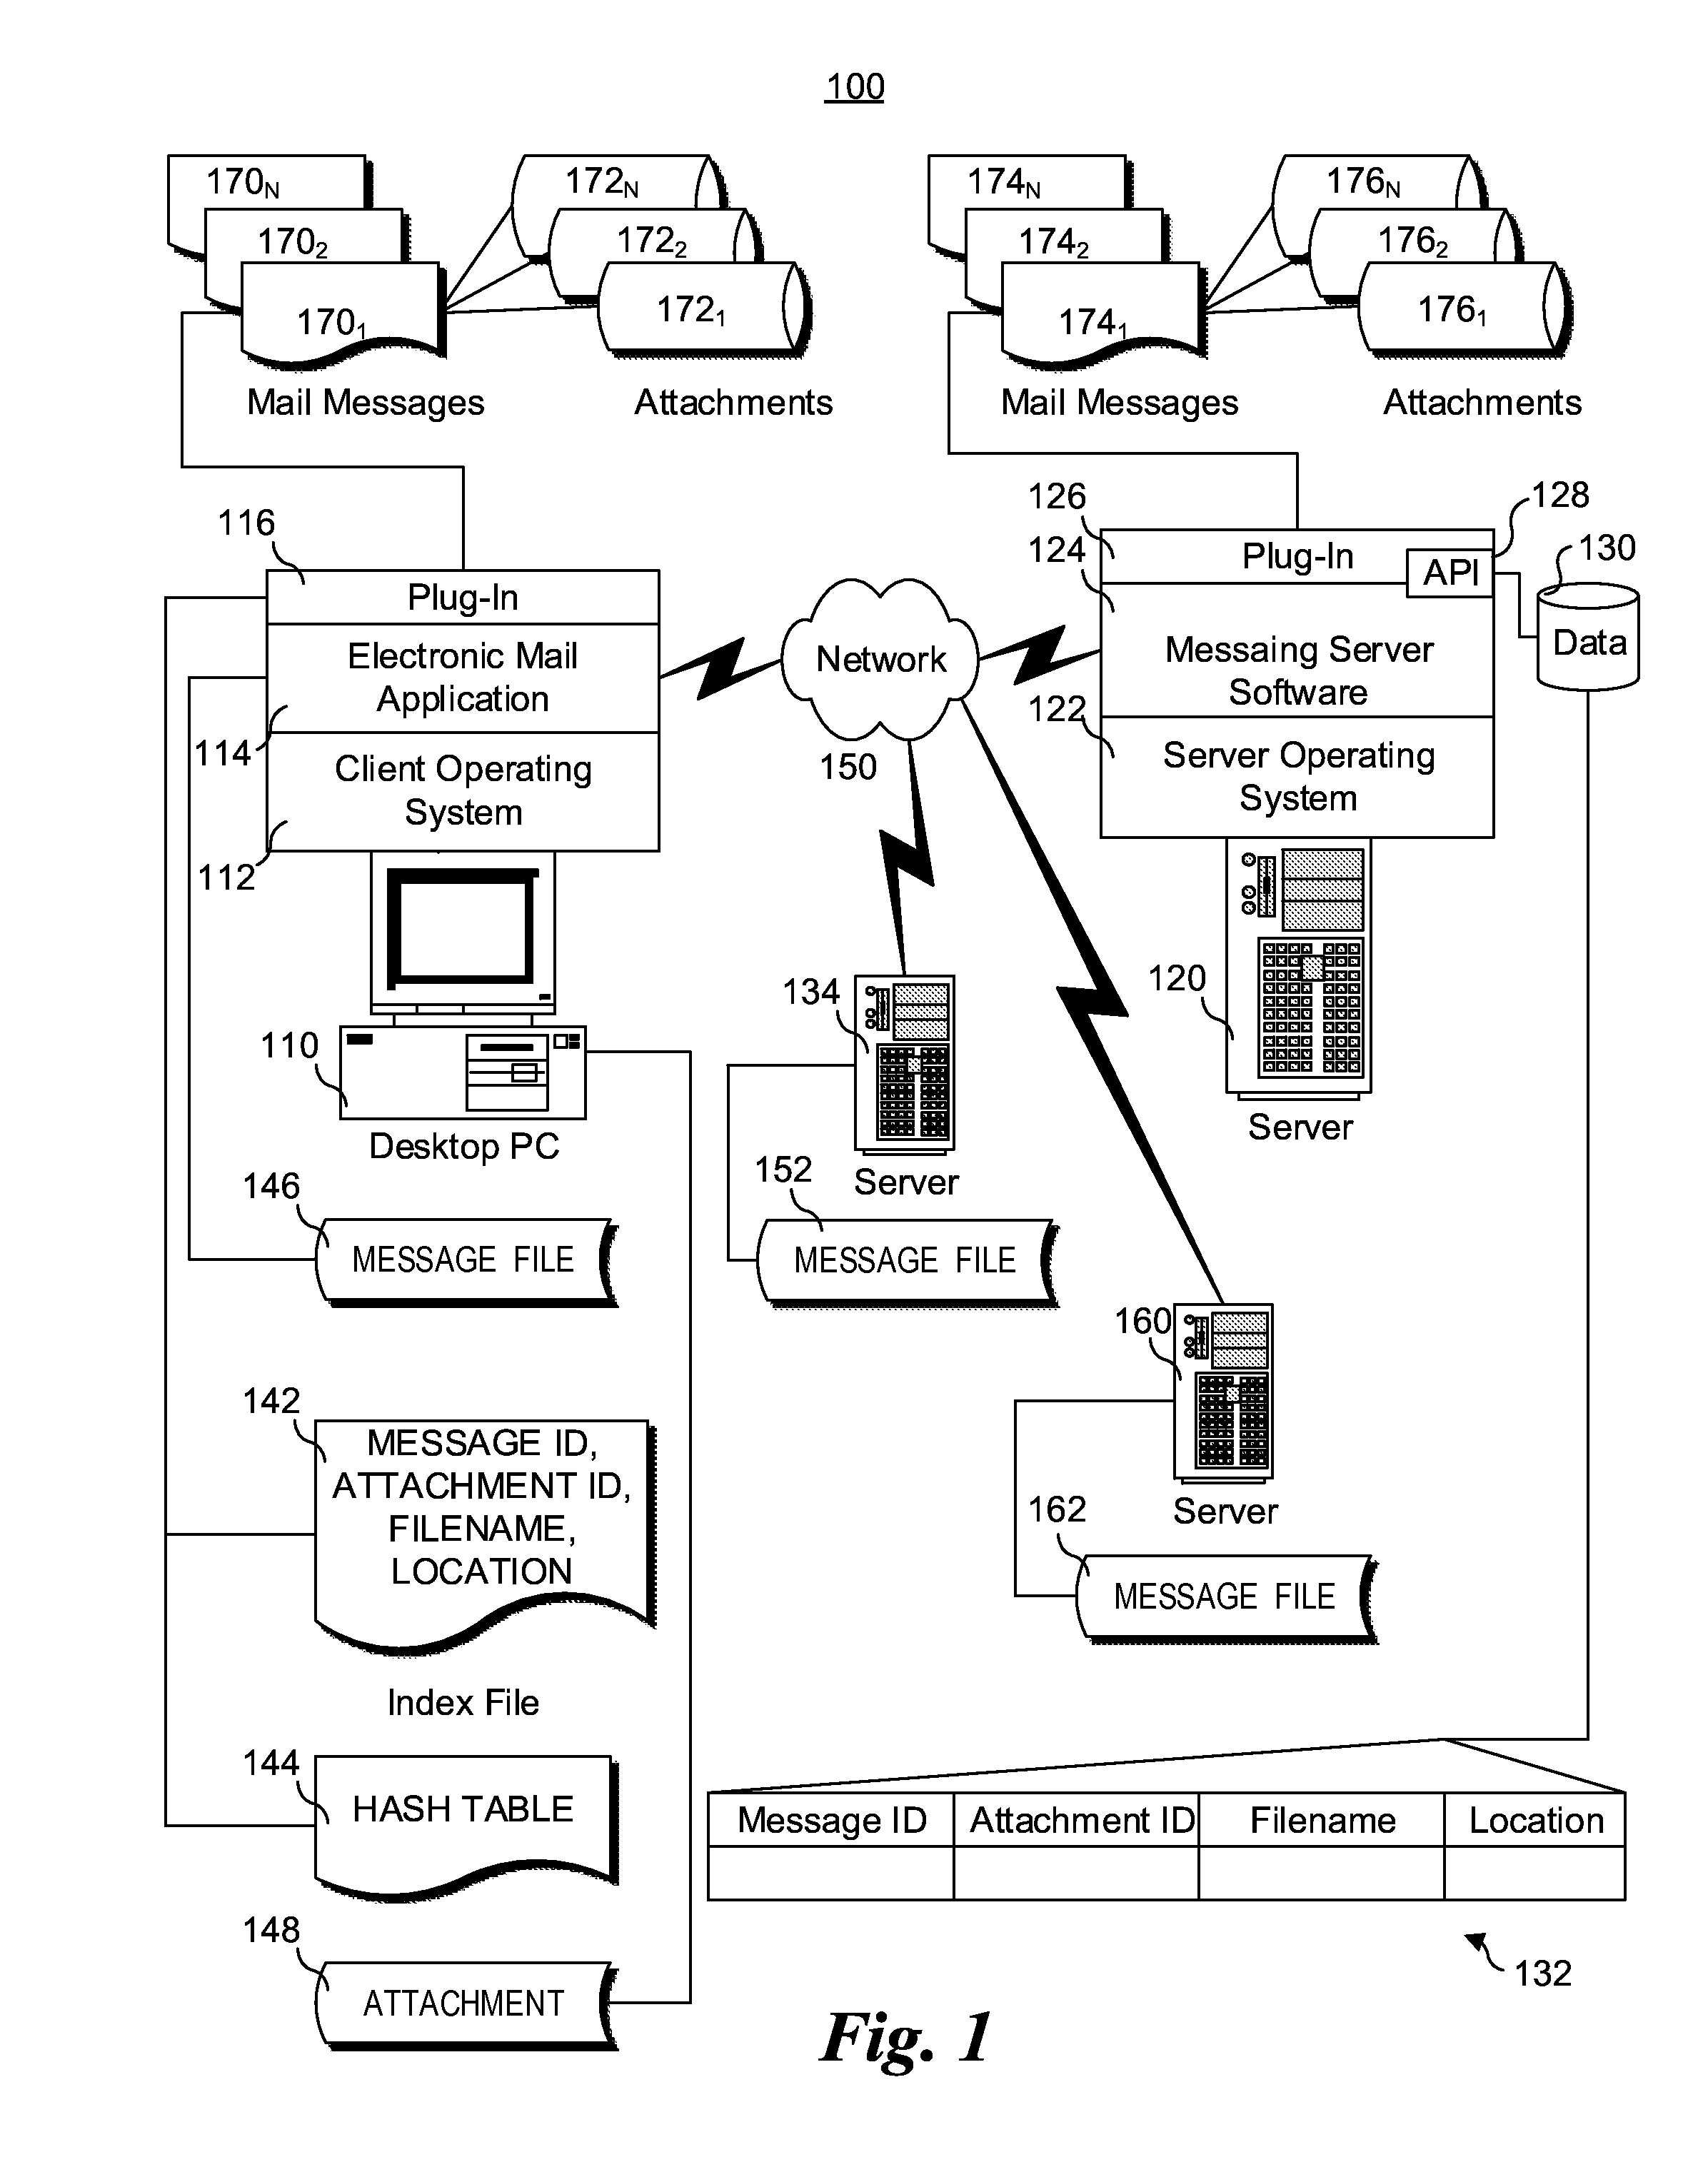 System and method for electronic mail attachment processing, offloading, retrieval, and grouping